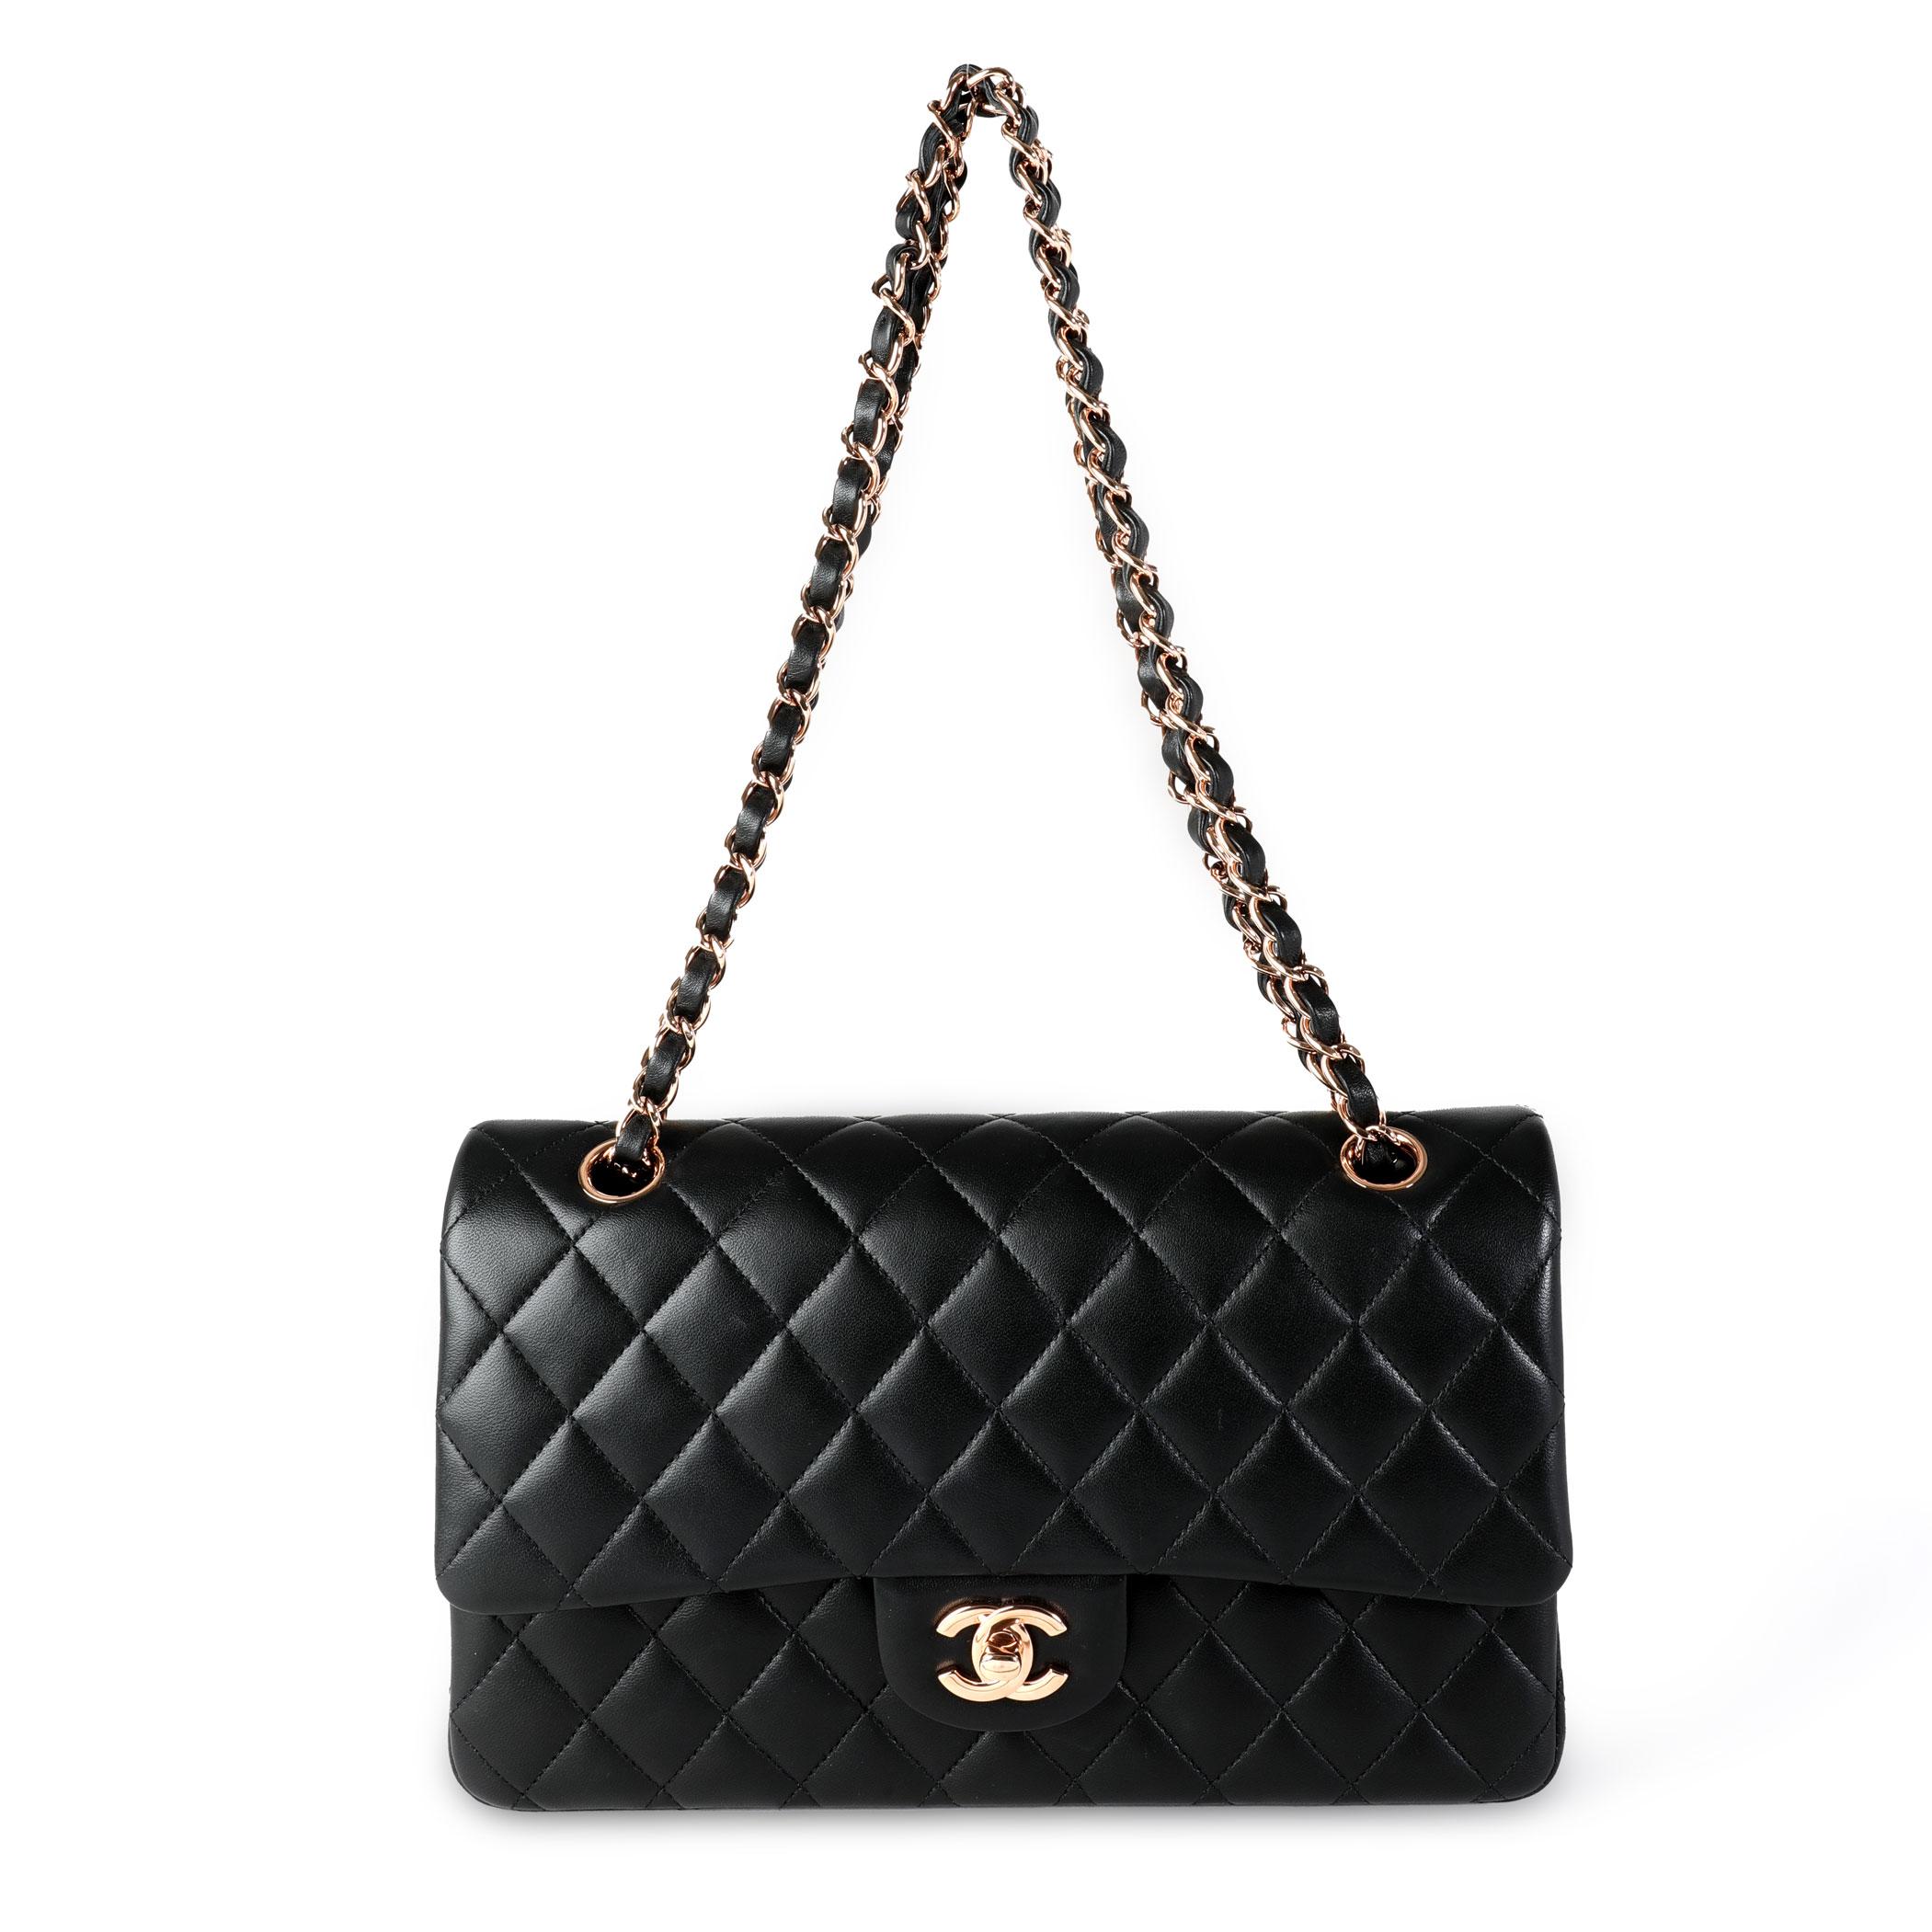 Listing Title: Chanel Black Quilted Lambskin Medium Classic Double Flap Bag
SKU: 116401
Condition: Pre-owned (3000)
Handbag Condition: Excellent
Condition Comments: Excellent Condition. Faint scuffs to exterior. No other visible signs of